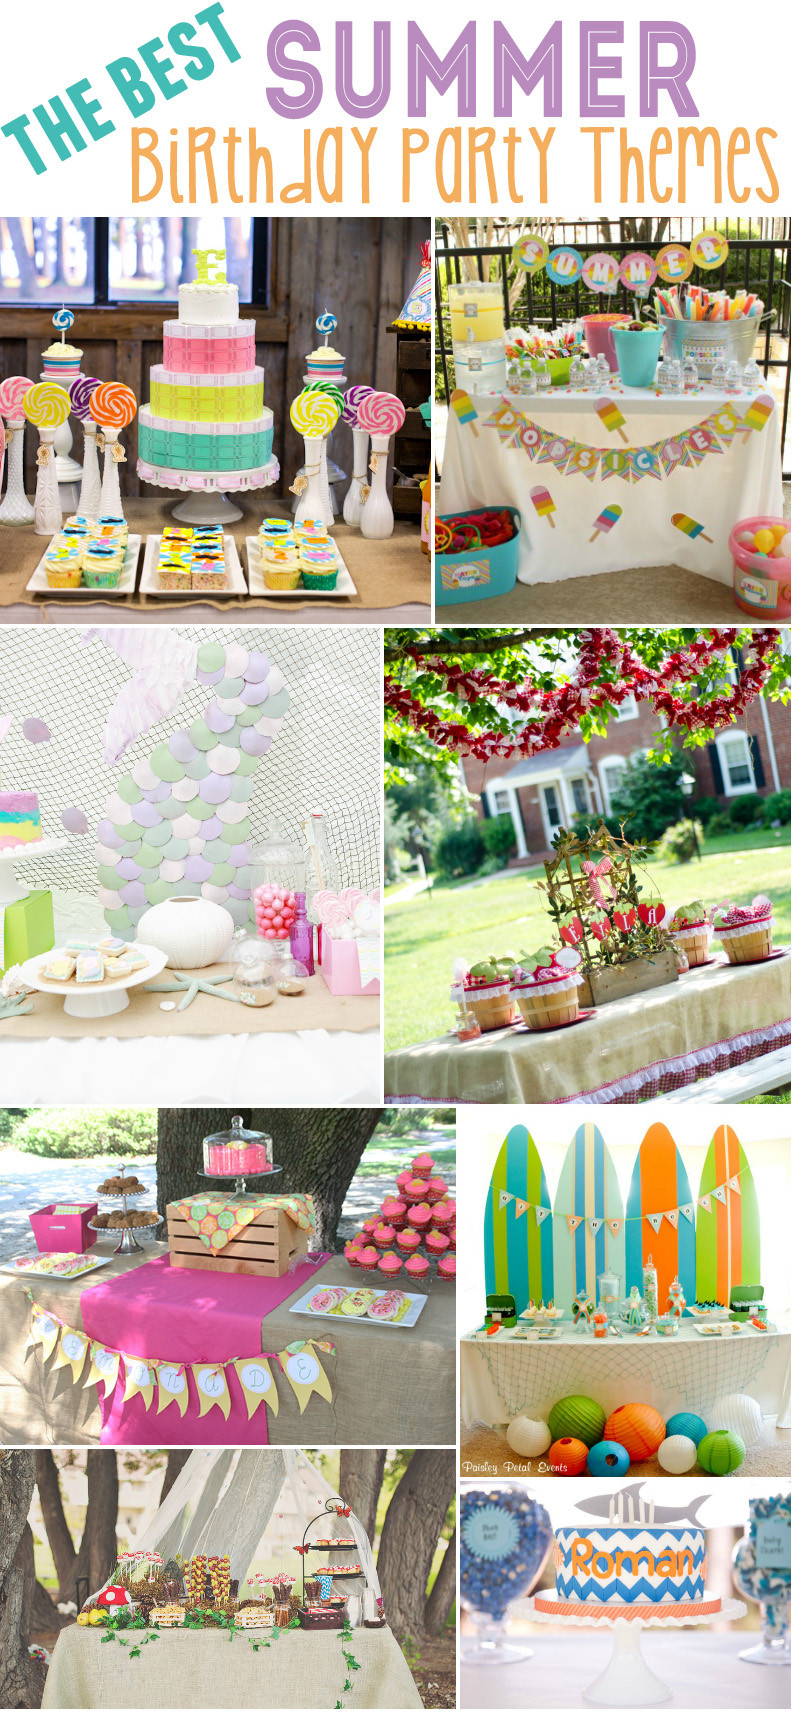 Summer Themed Birthday Party Ideas
 15 Best Summer Birthday Party Themes Design Dazzle